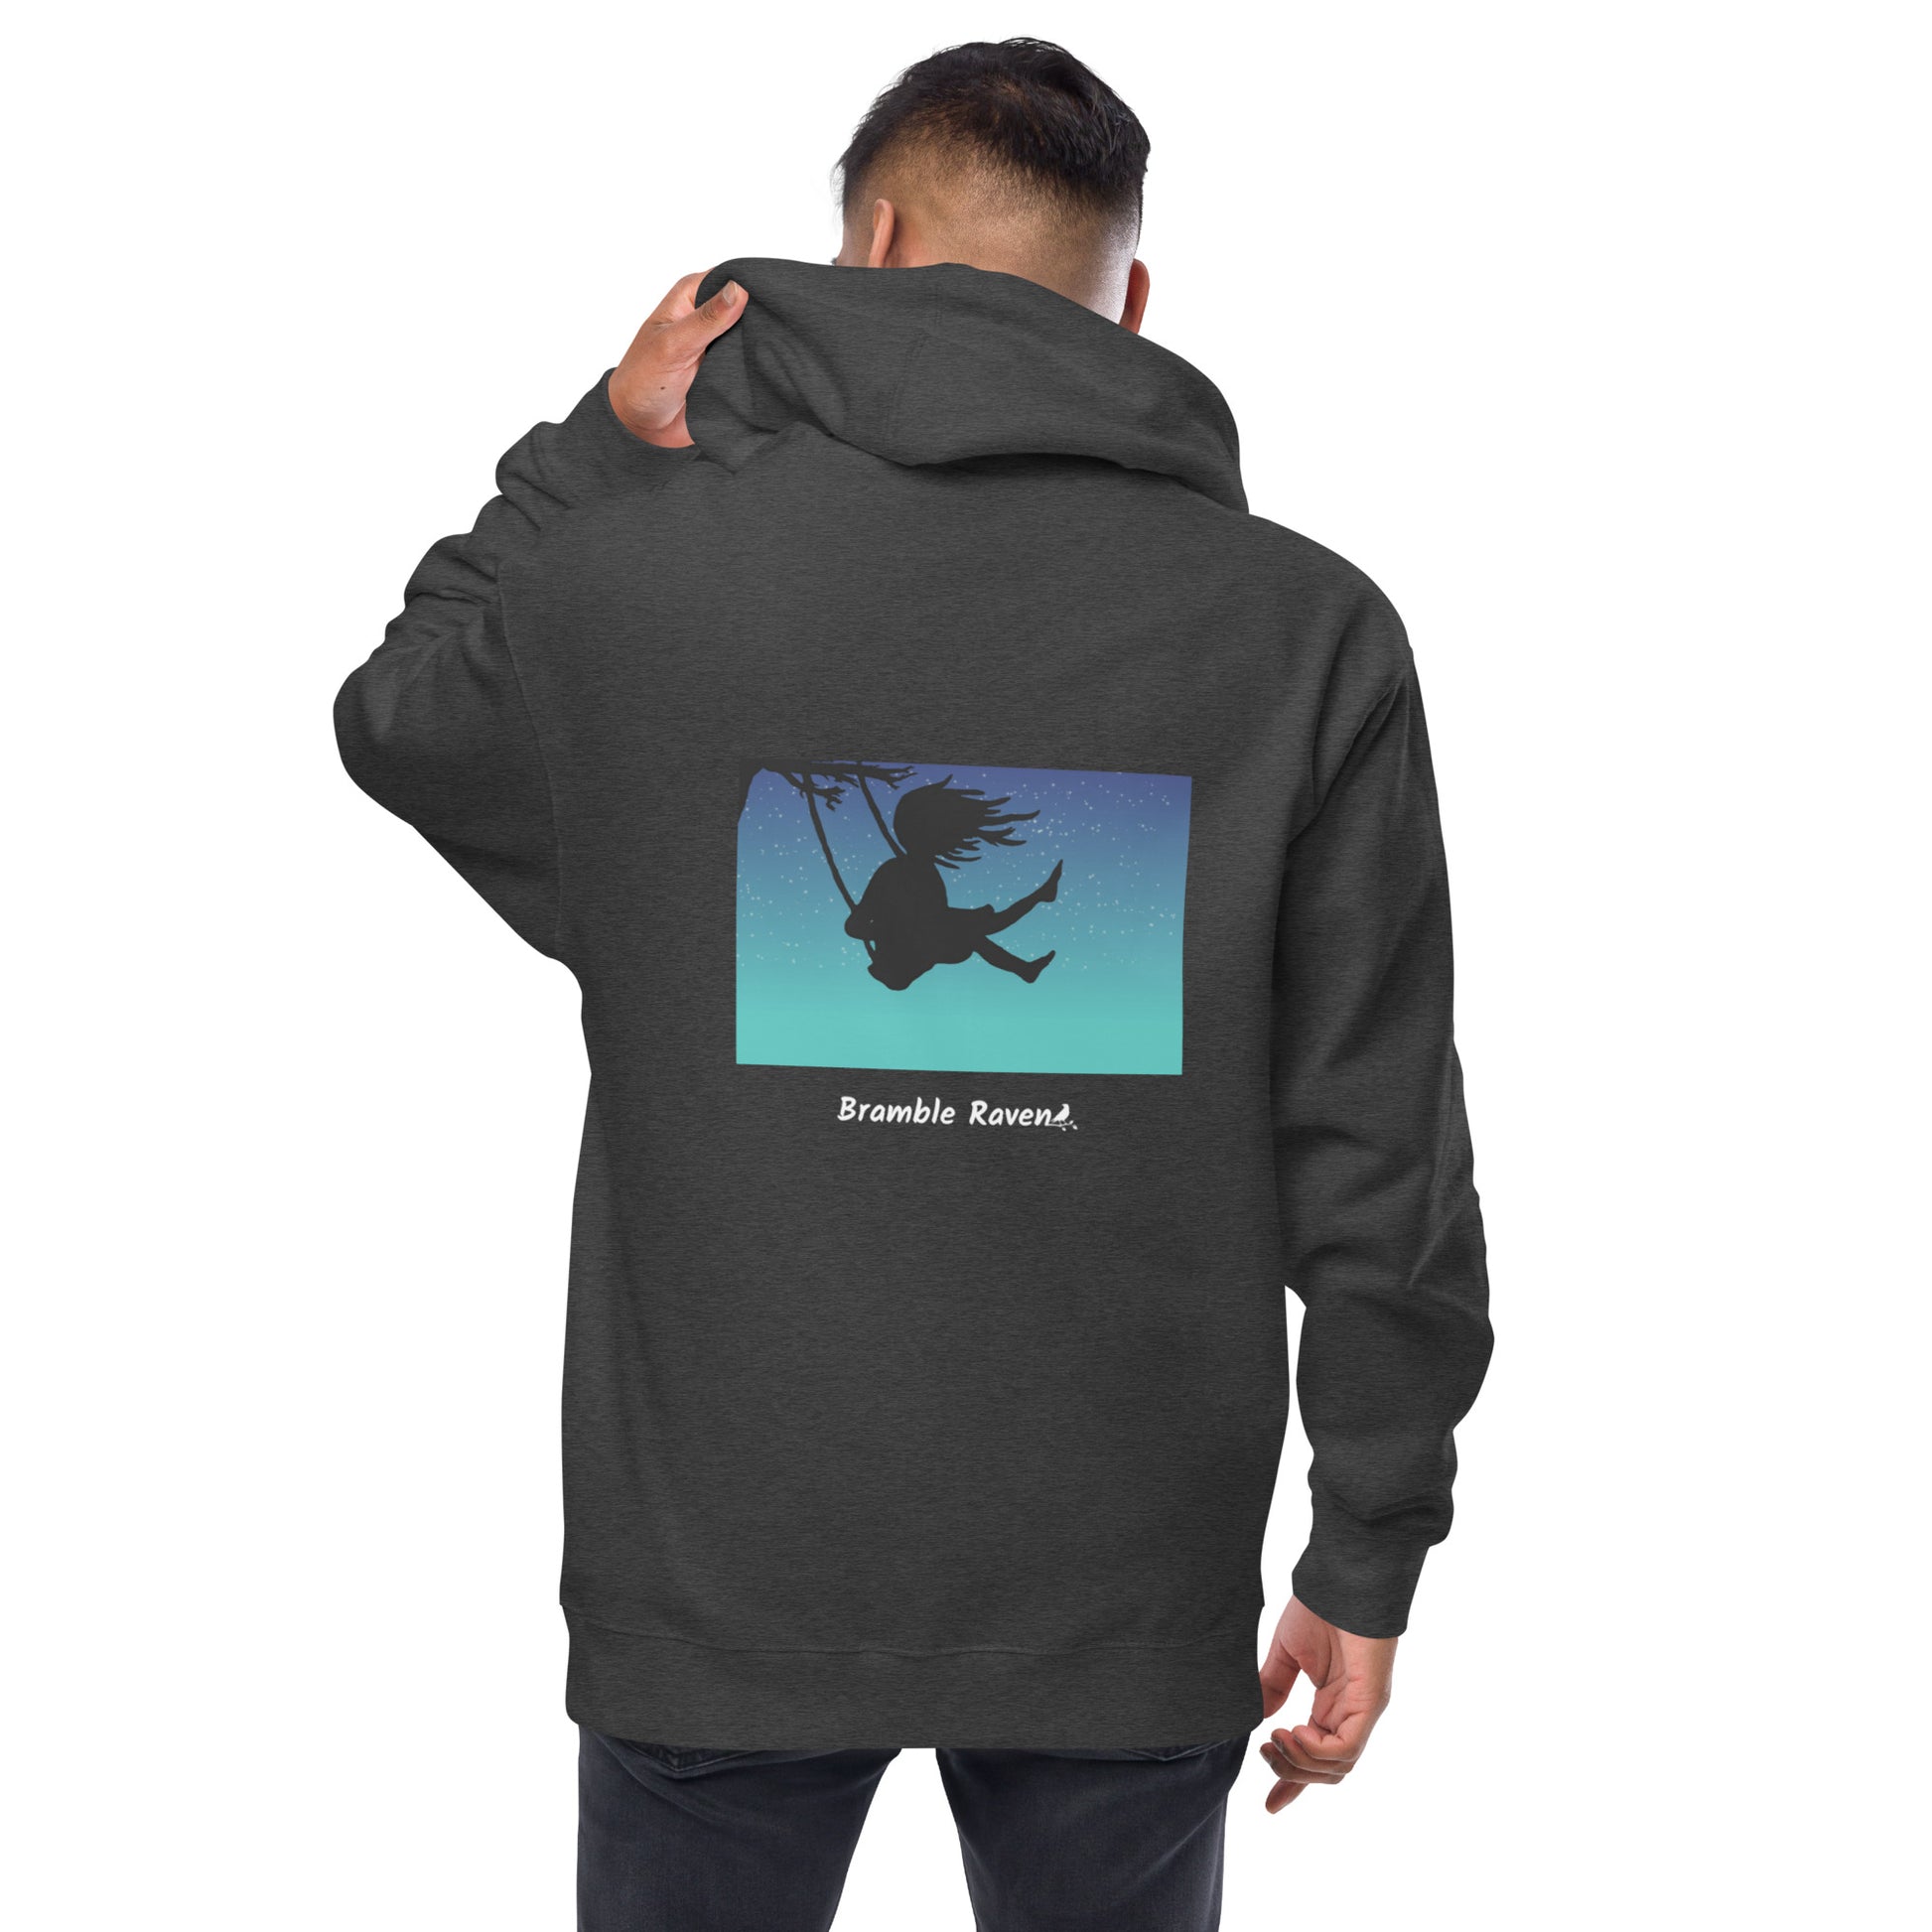 Original Swing Free design of a girl's silhouette in a tree swing against the backdrop of a blue starry sky. Rectangular image on the back of a unisex fleece-lined charcoal heather grey colored zip up hoodie. Shown on male model.